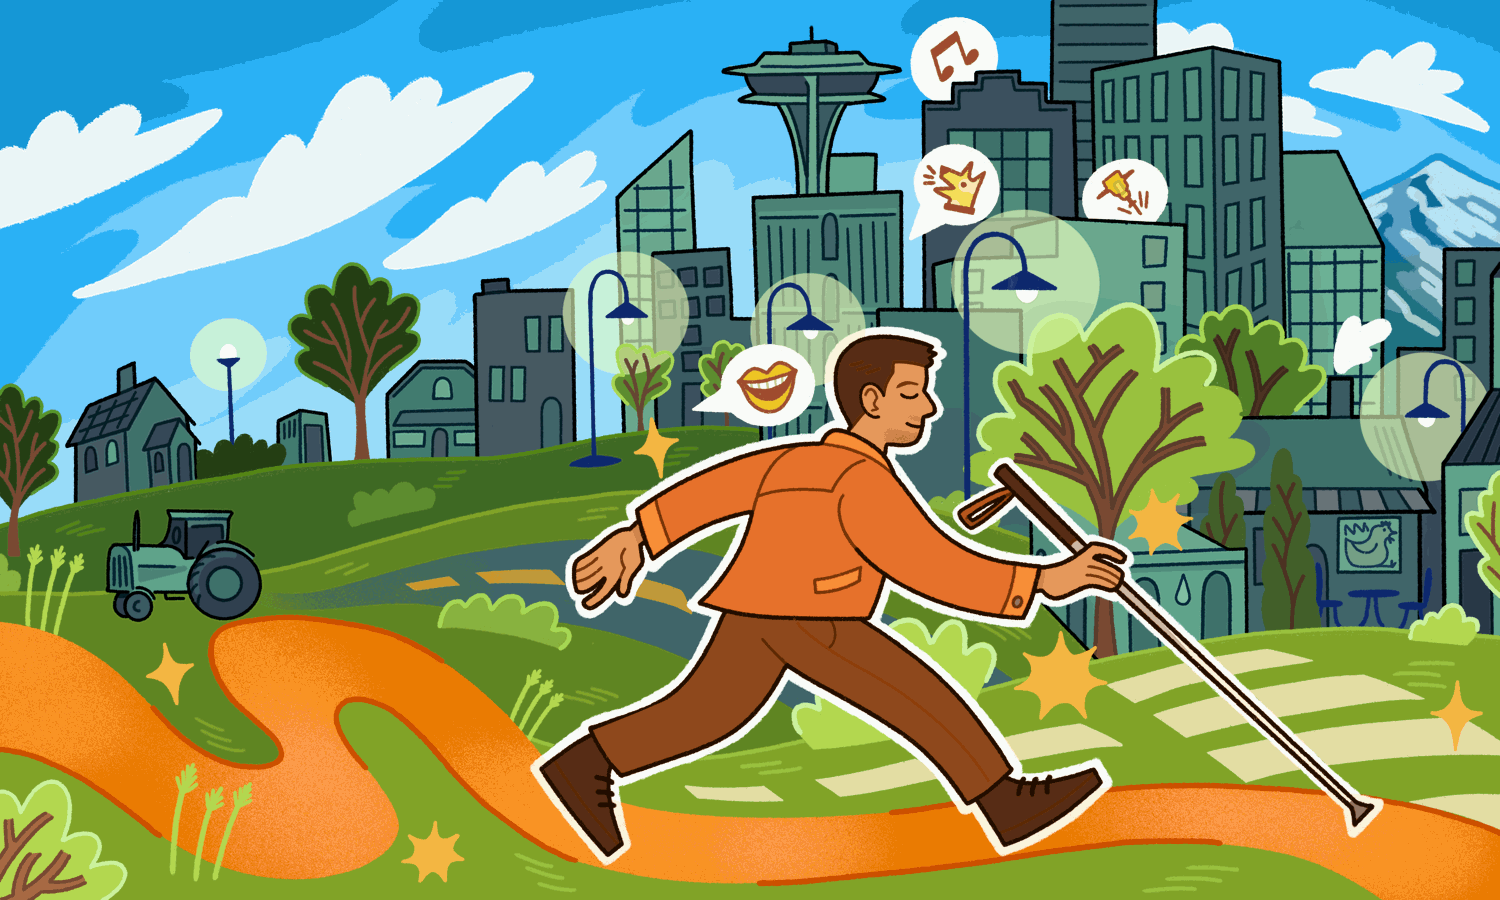 An illustration a man using a cane to navigate a city because he is blind. Miguel Chavez grew up in rural Washington, where few resources existed for people with disabilities. Through education & self-advocacy, he finds opportunities in a new environment & community in his chosen family.